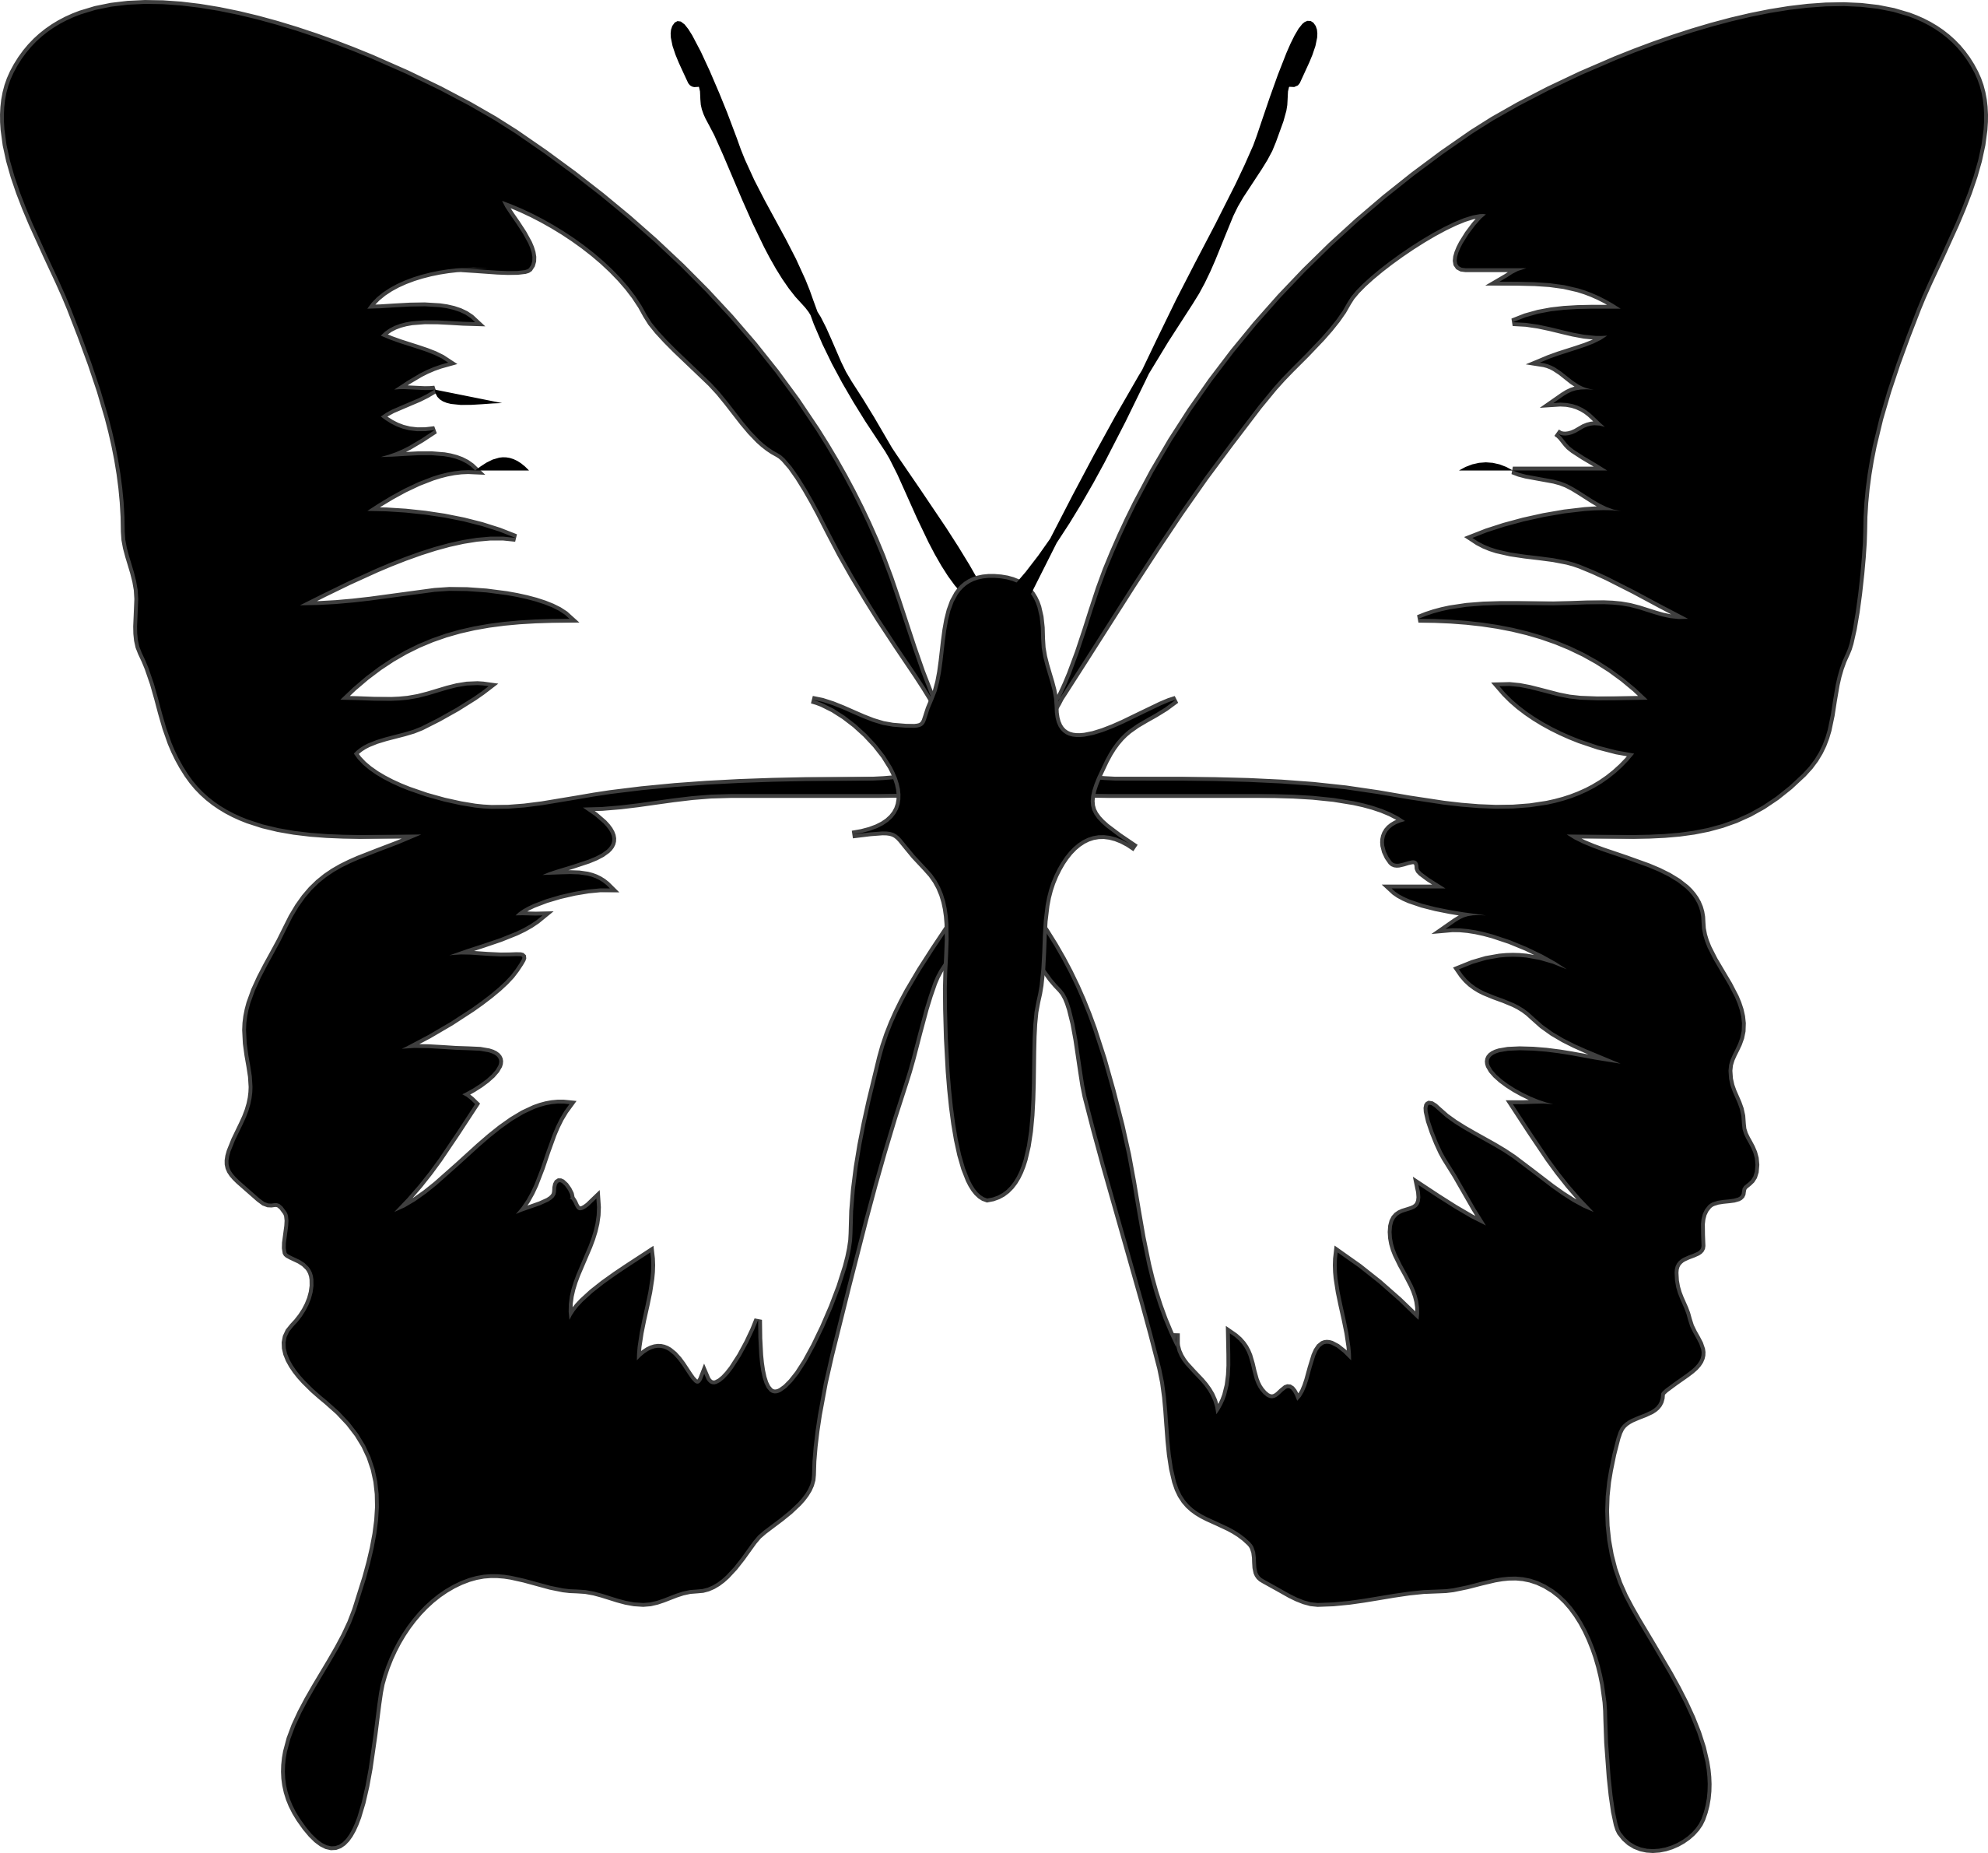 Clip art black and. Feathers clipart butterfly